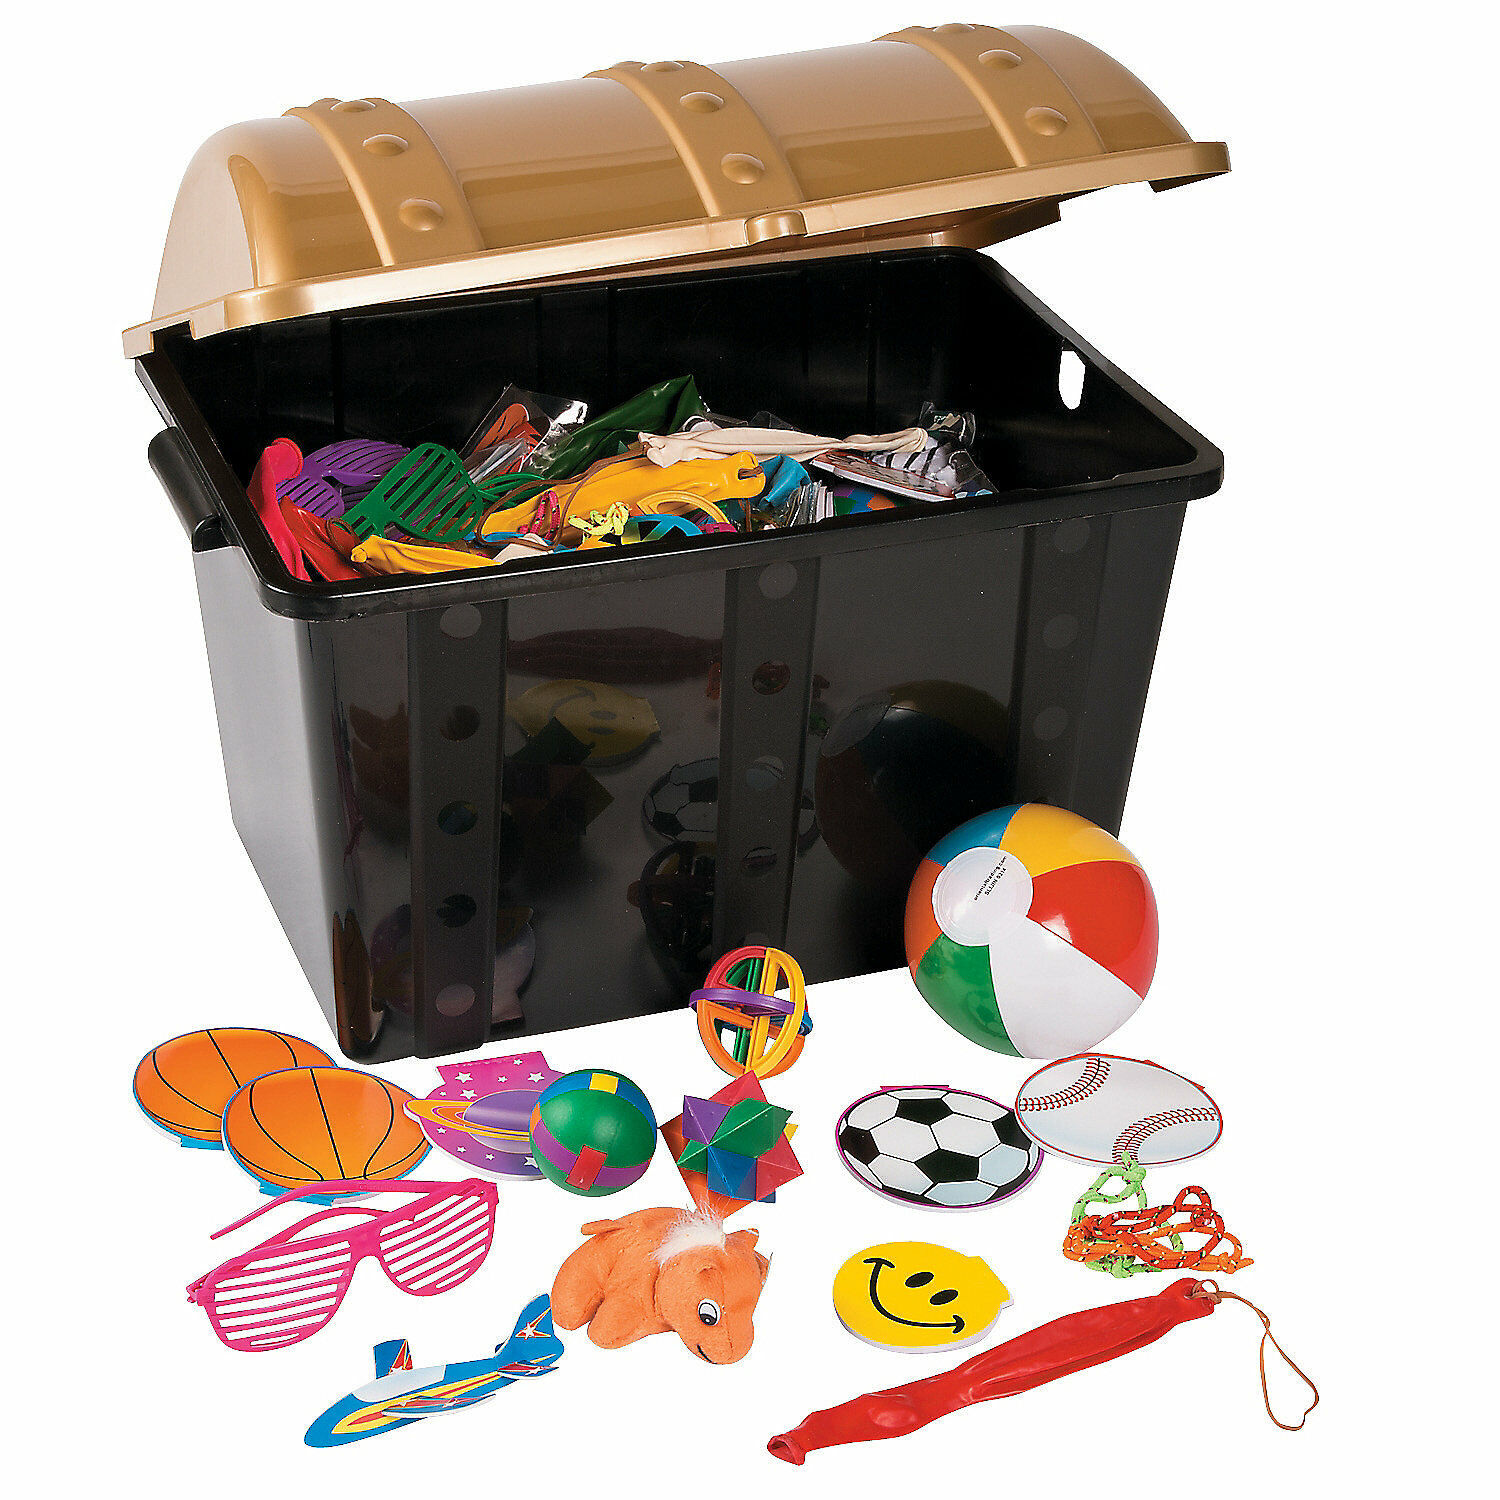 Bulk Treasure Chest With Toys - 500 Pc. - Toys - 500 Pieces